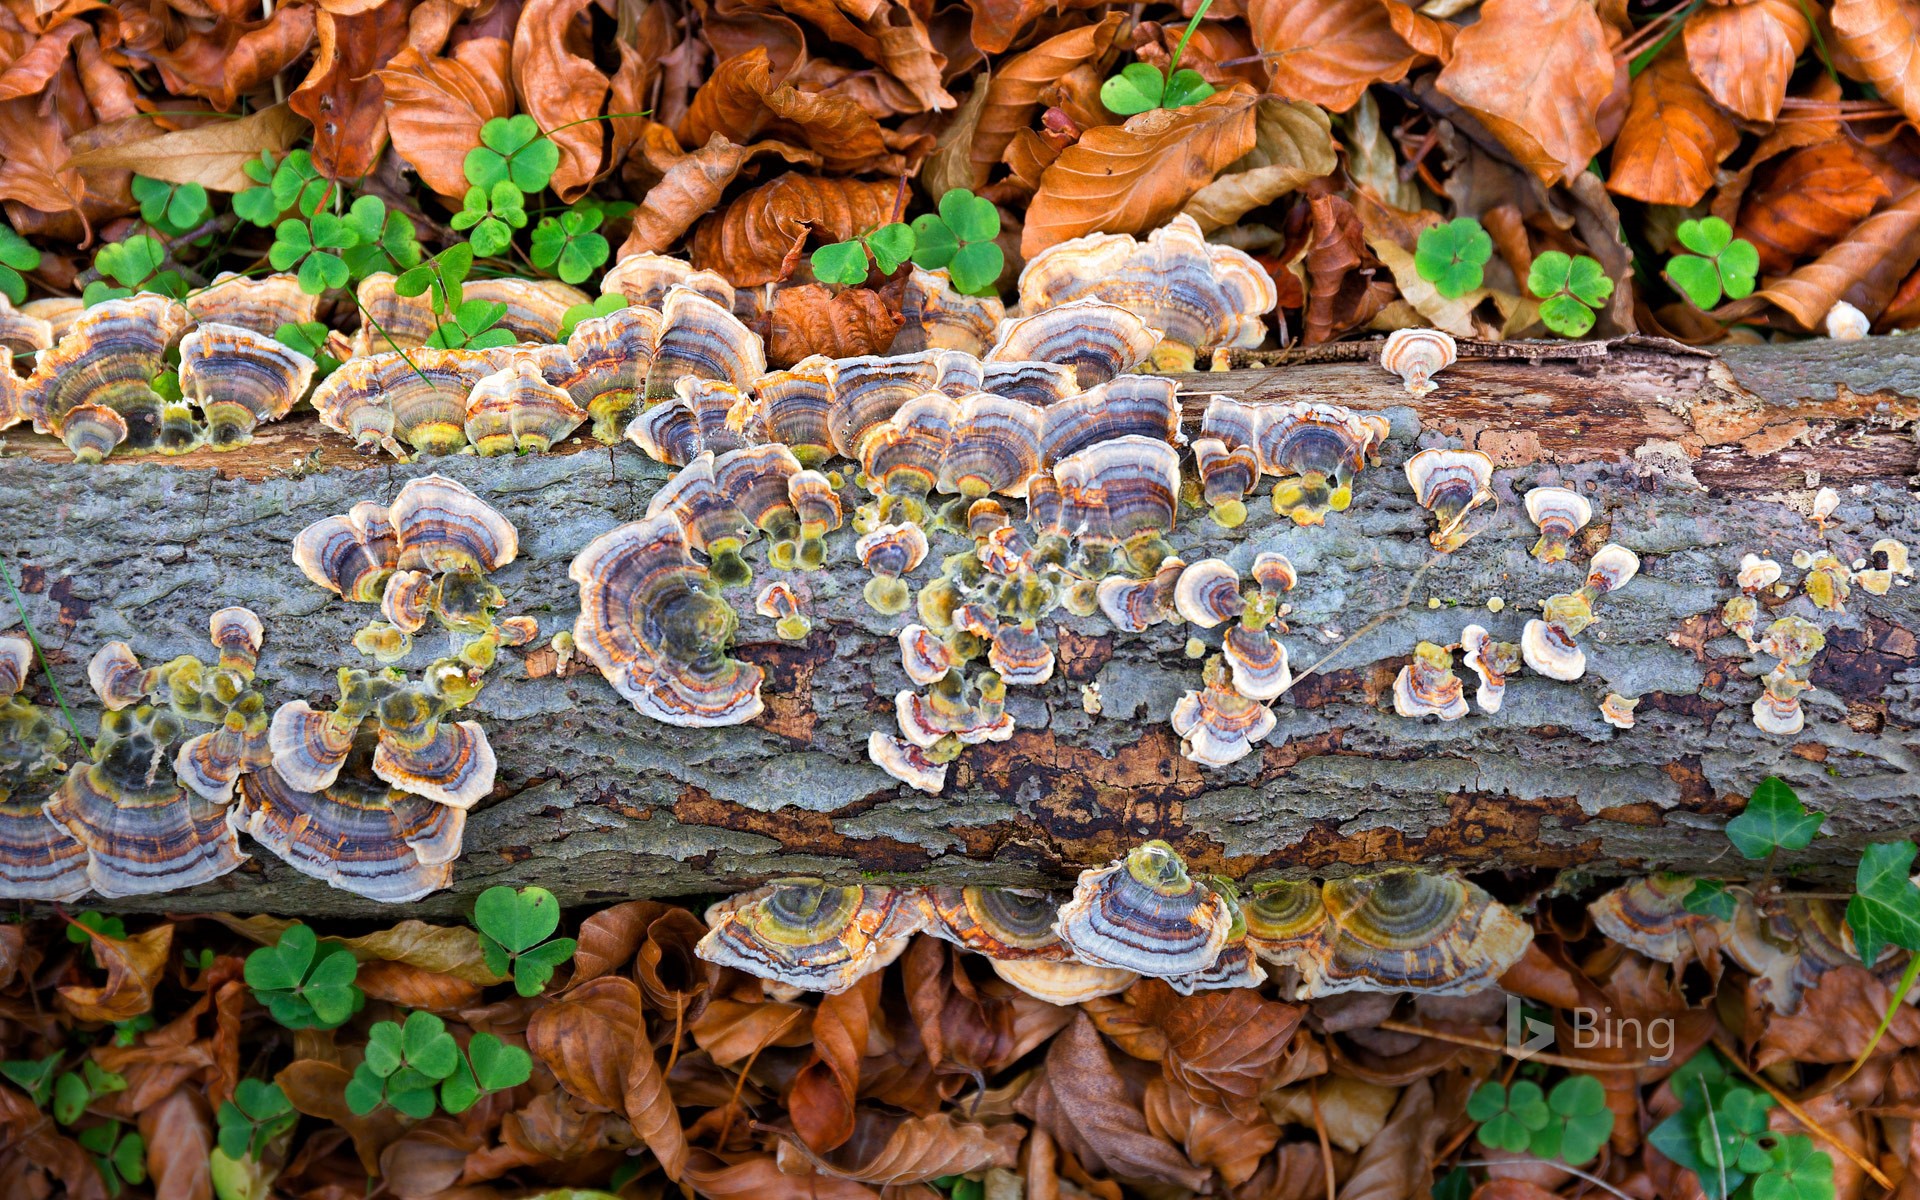 Turkey tail fungus in Gorbea Natural Park, Spain